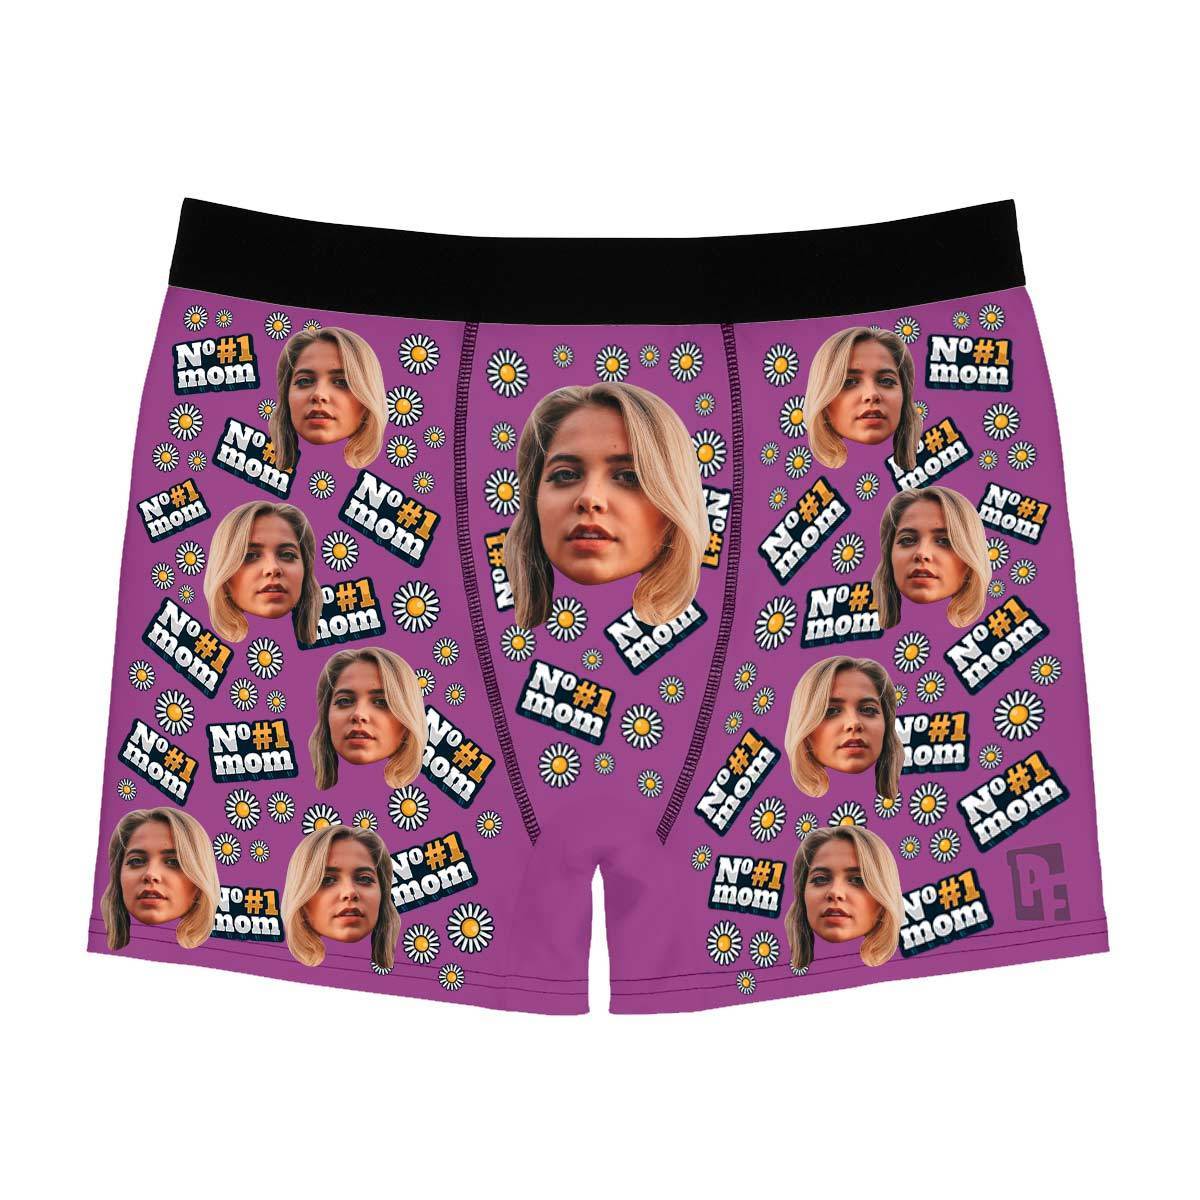 Purple #1 Mom men's boxer briefs personalized with photo printed on them